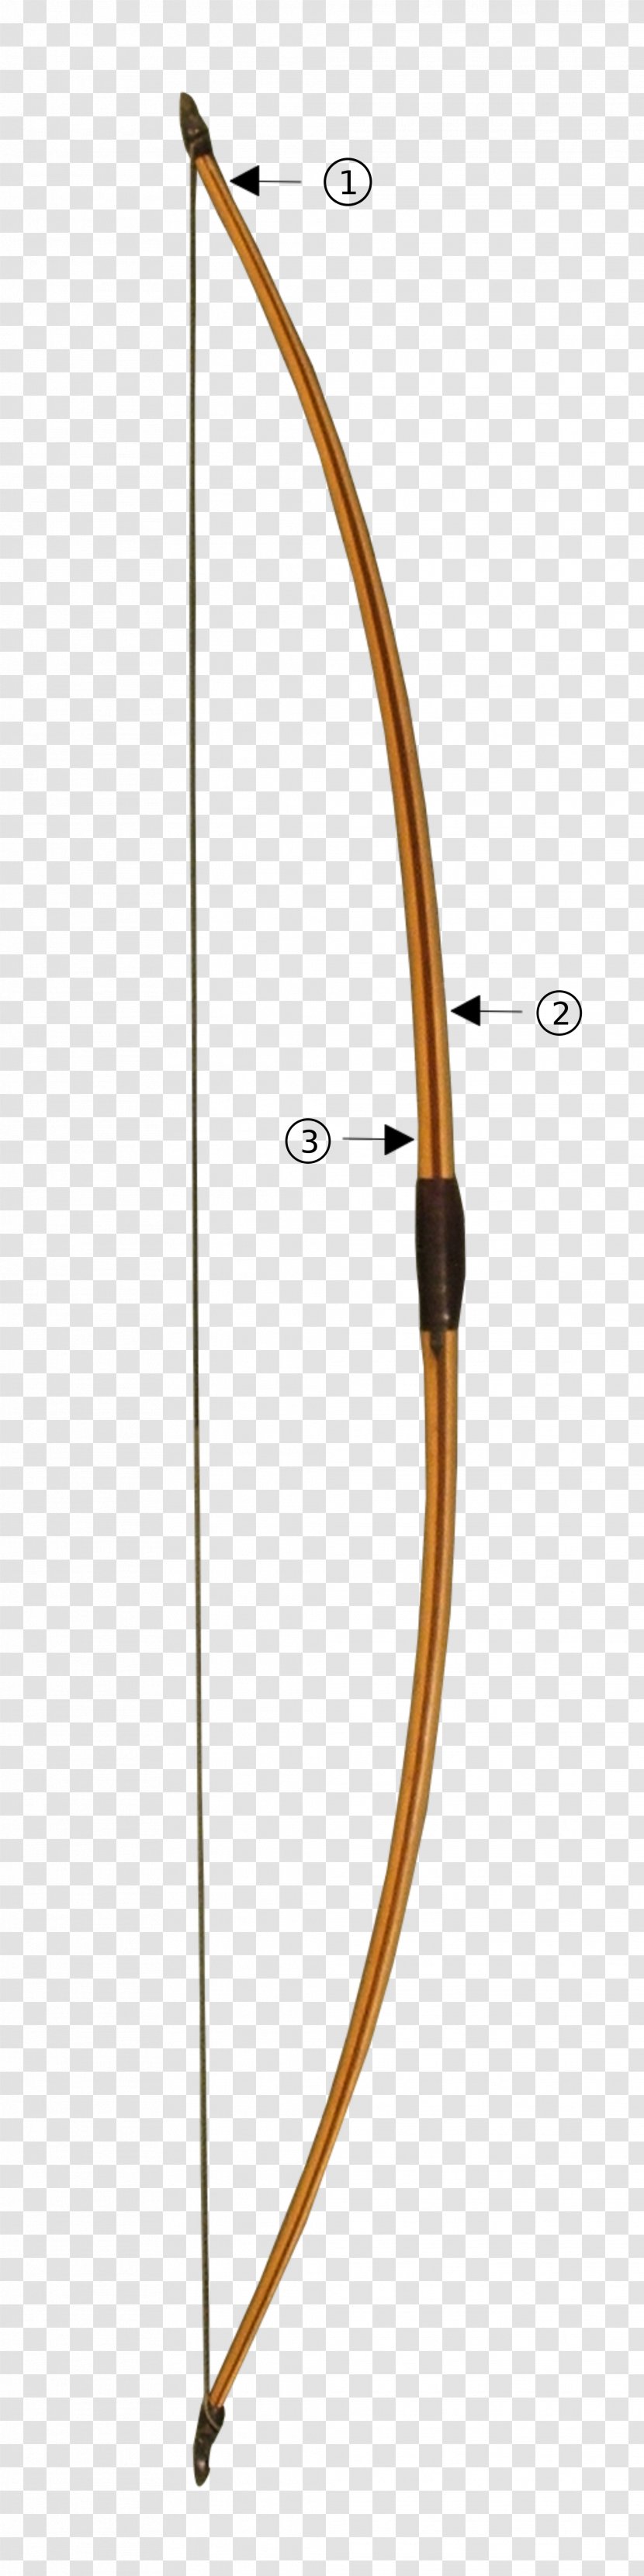 Middle Ages English Longbow Bow And Arrow - Bartender Transparent PNG